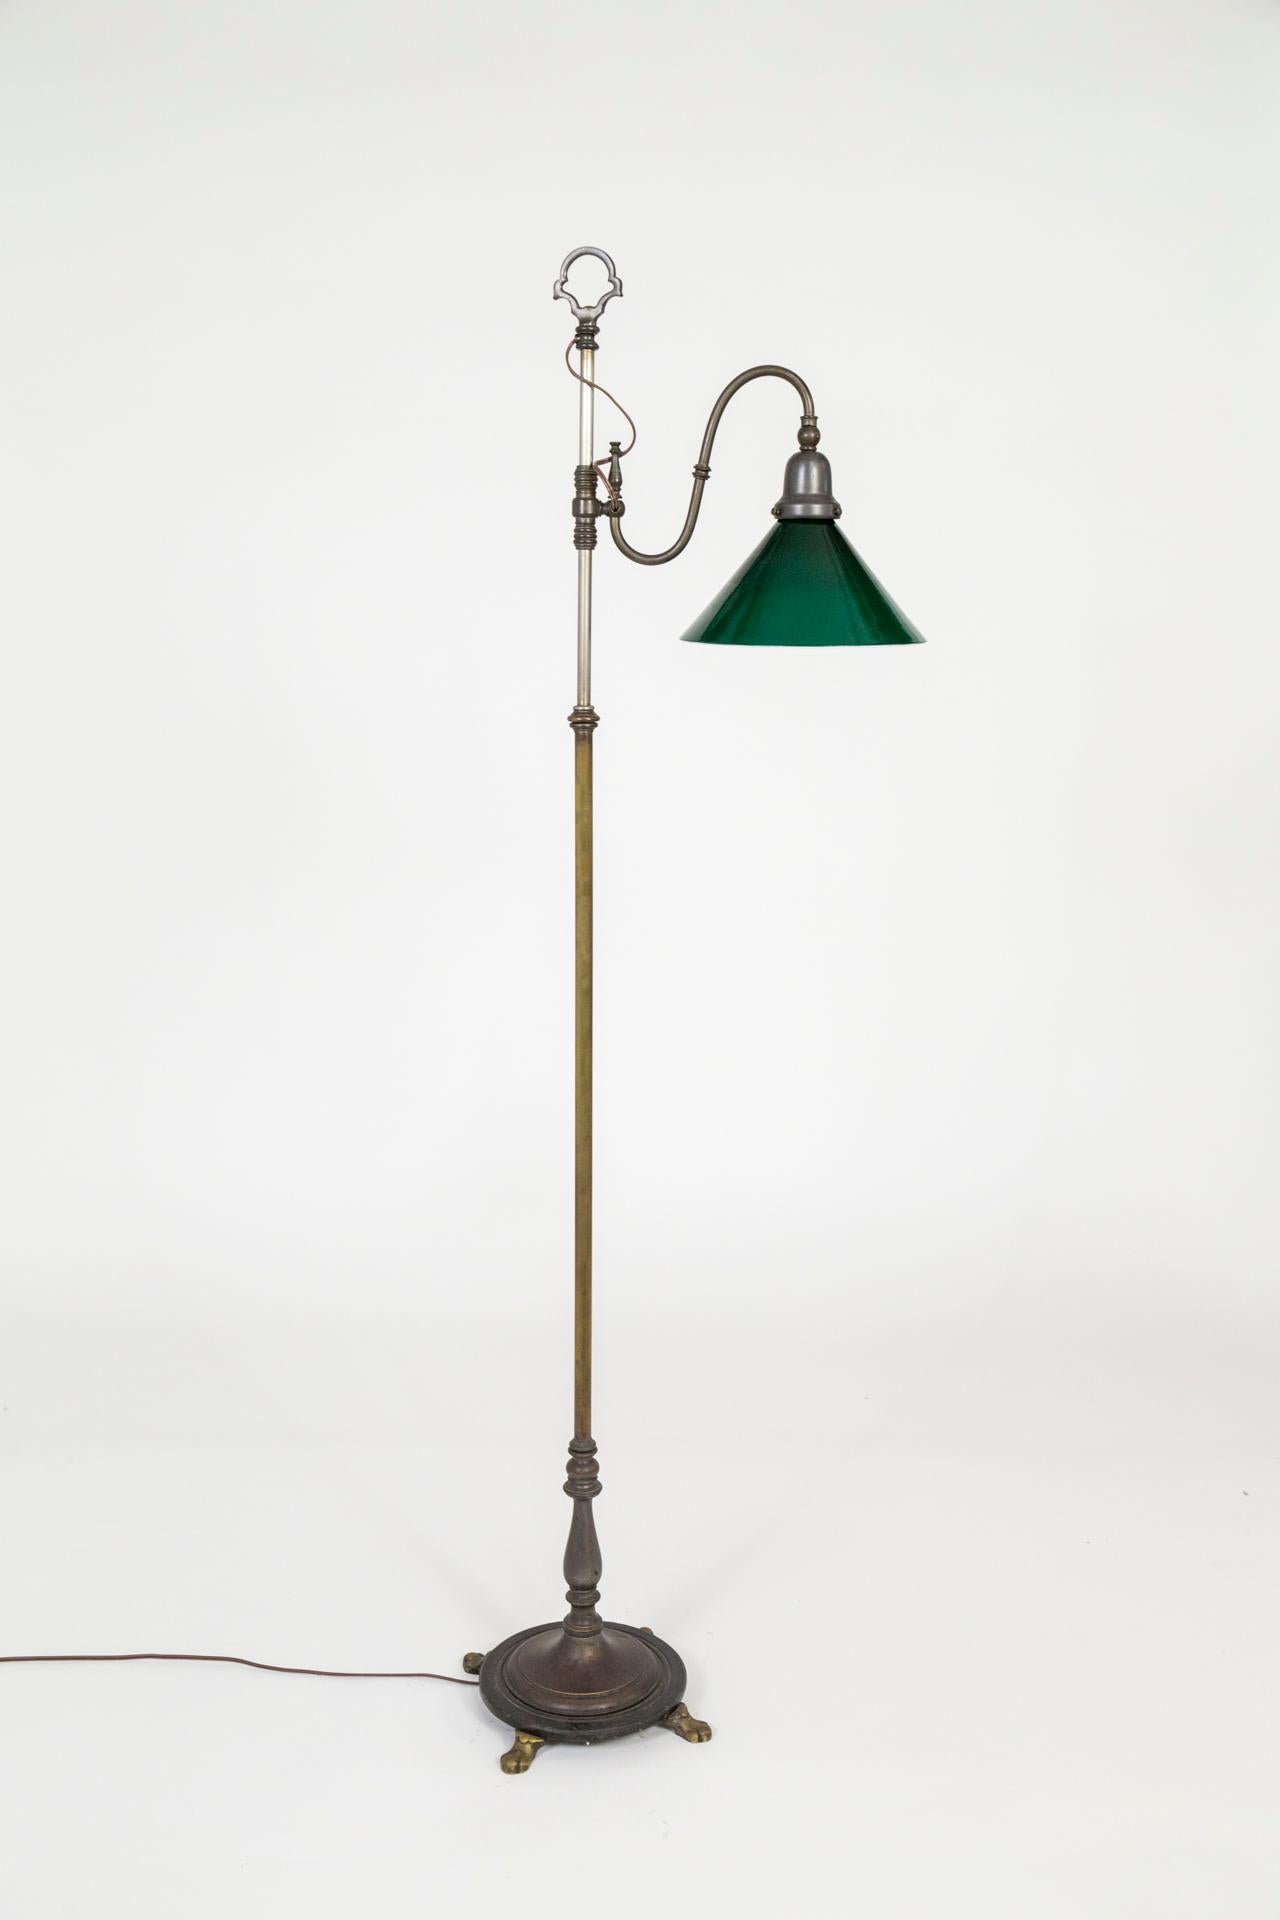 Metal 1930s Adjustable Paw Foot Floor Lamp with Green Glass Shade